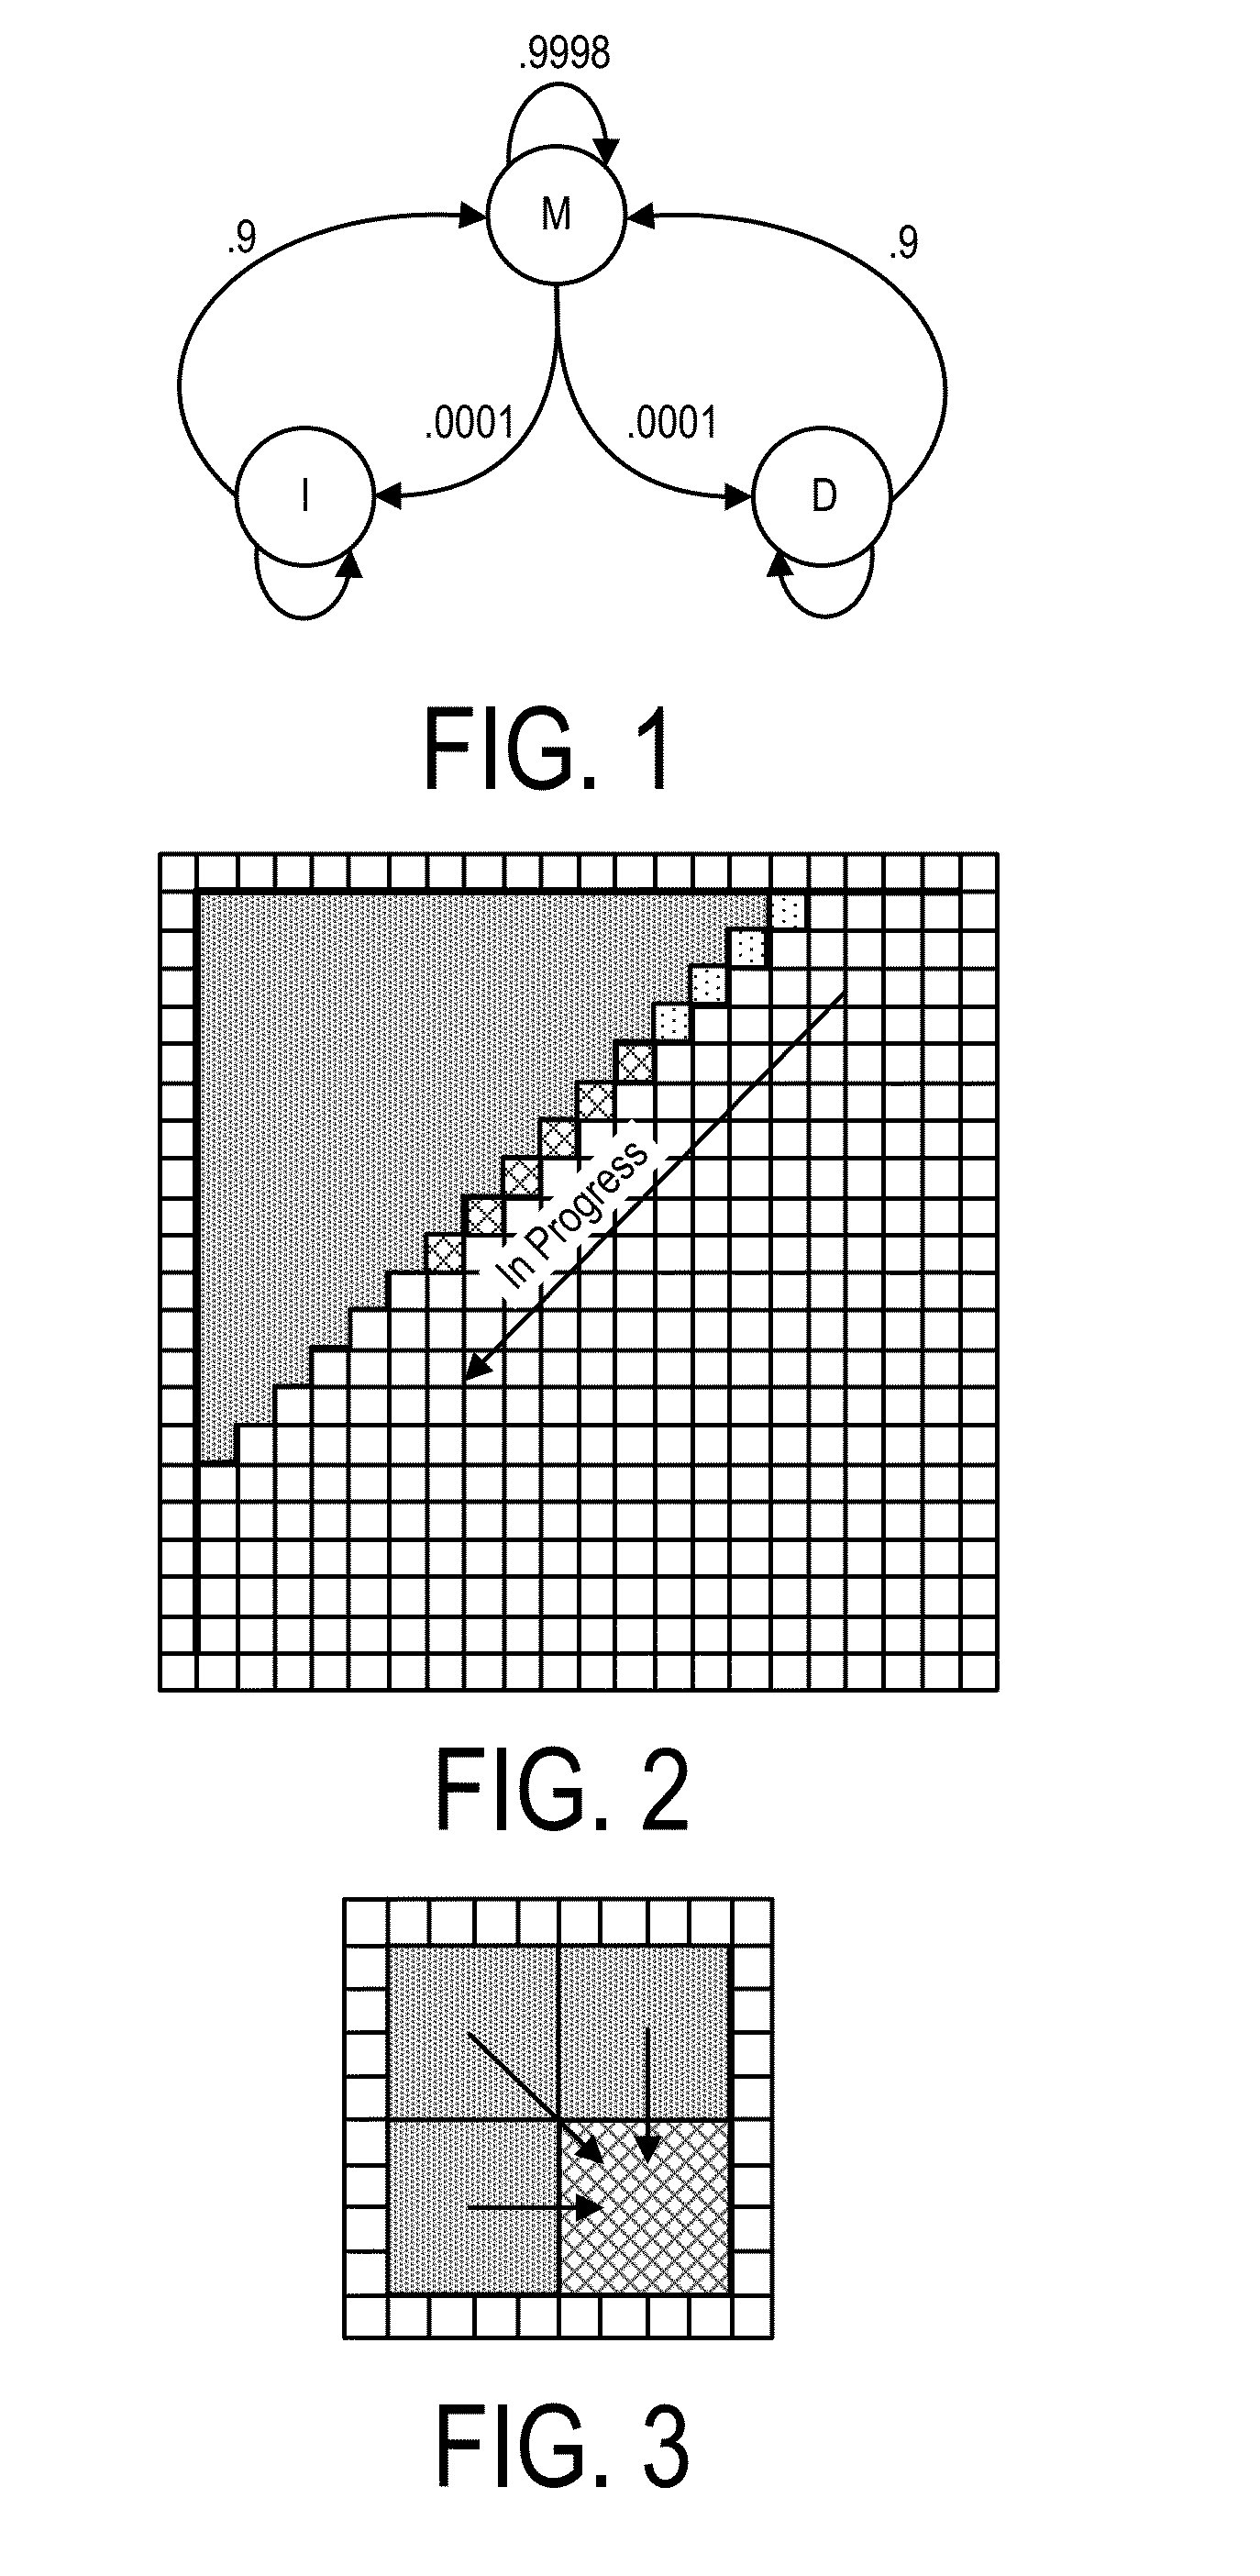 Bioinformatics Systems, Apparatuses, And Methods Executed On An Integrated Circuit Processing Platform